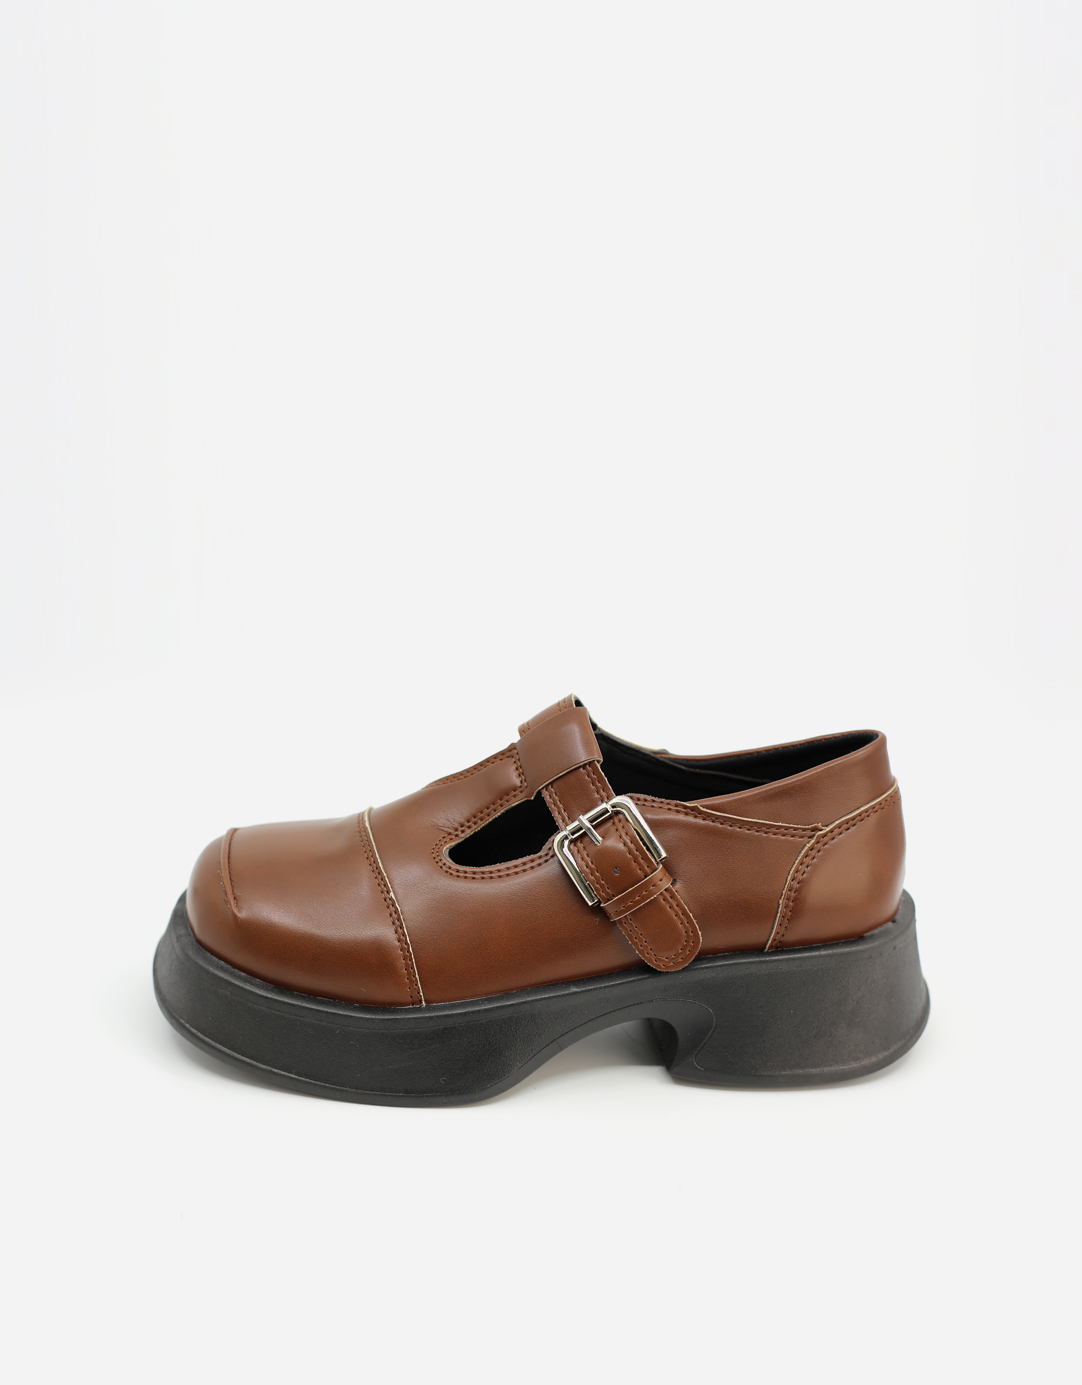 BROWN MINIMAL MARY JANE LOAFER